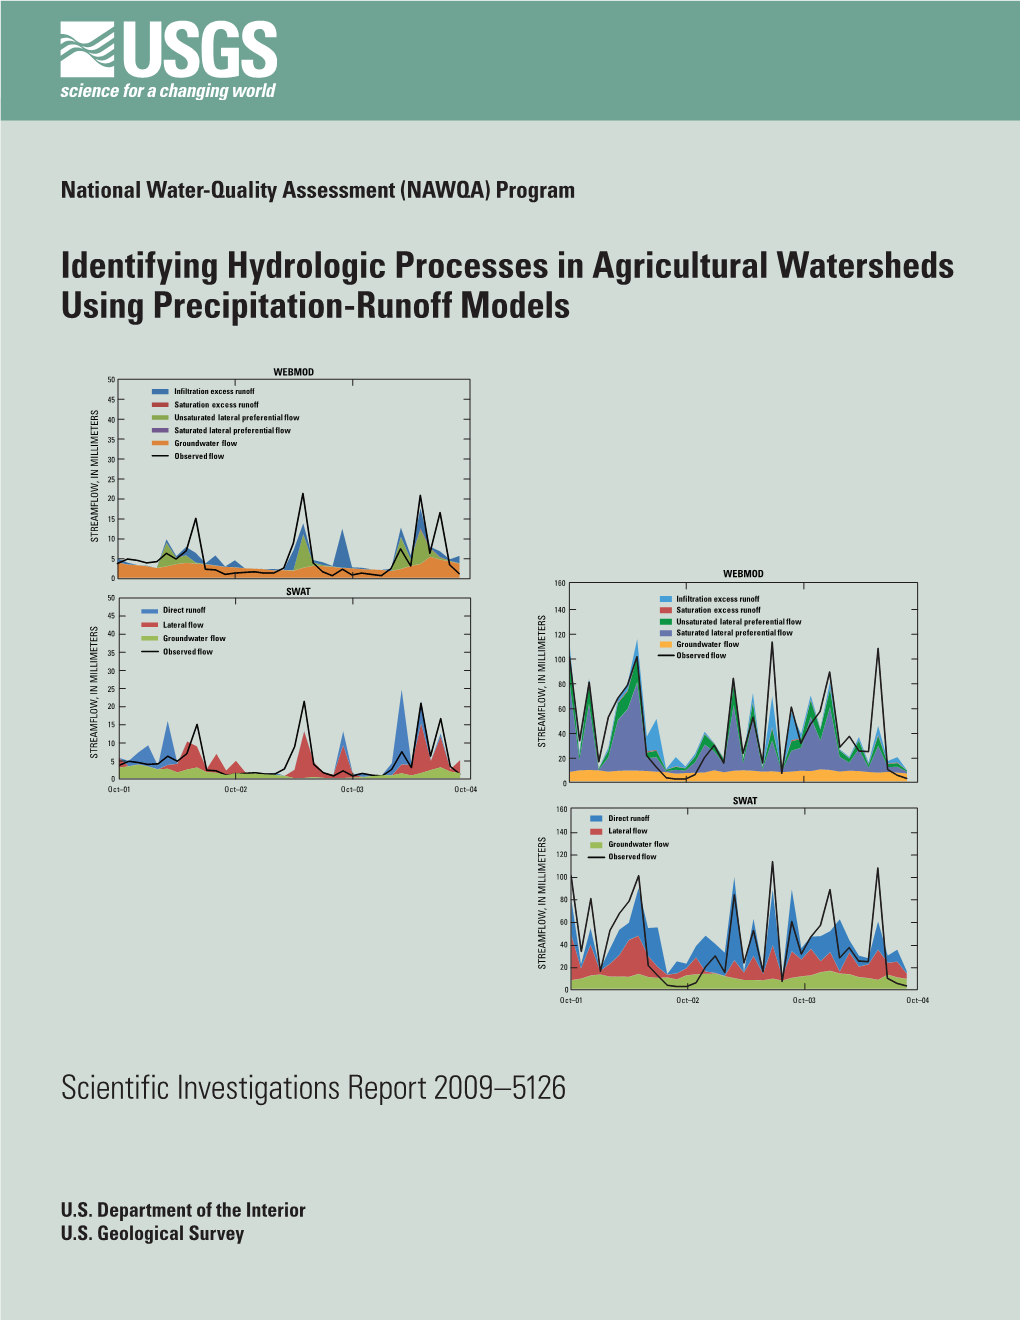 Identifying Hydrologic Processes in Agricultural Watersheds Using Precipitation-Runoff Models